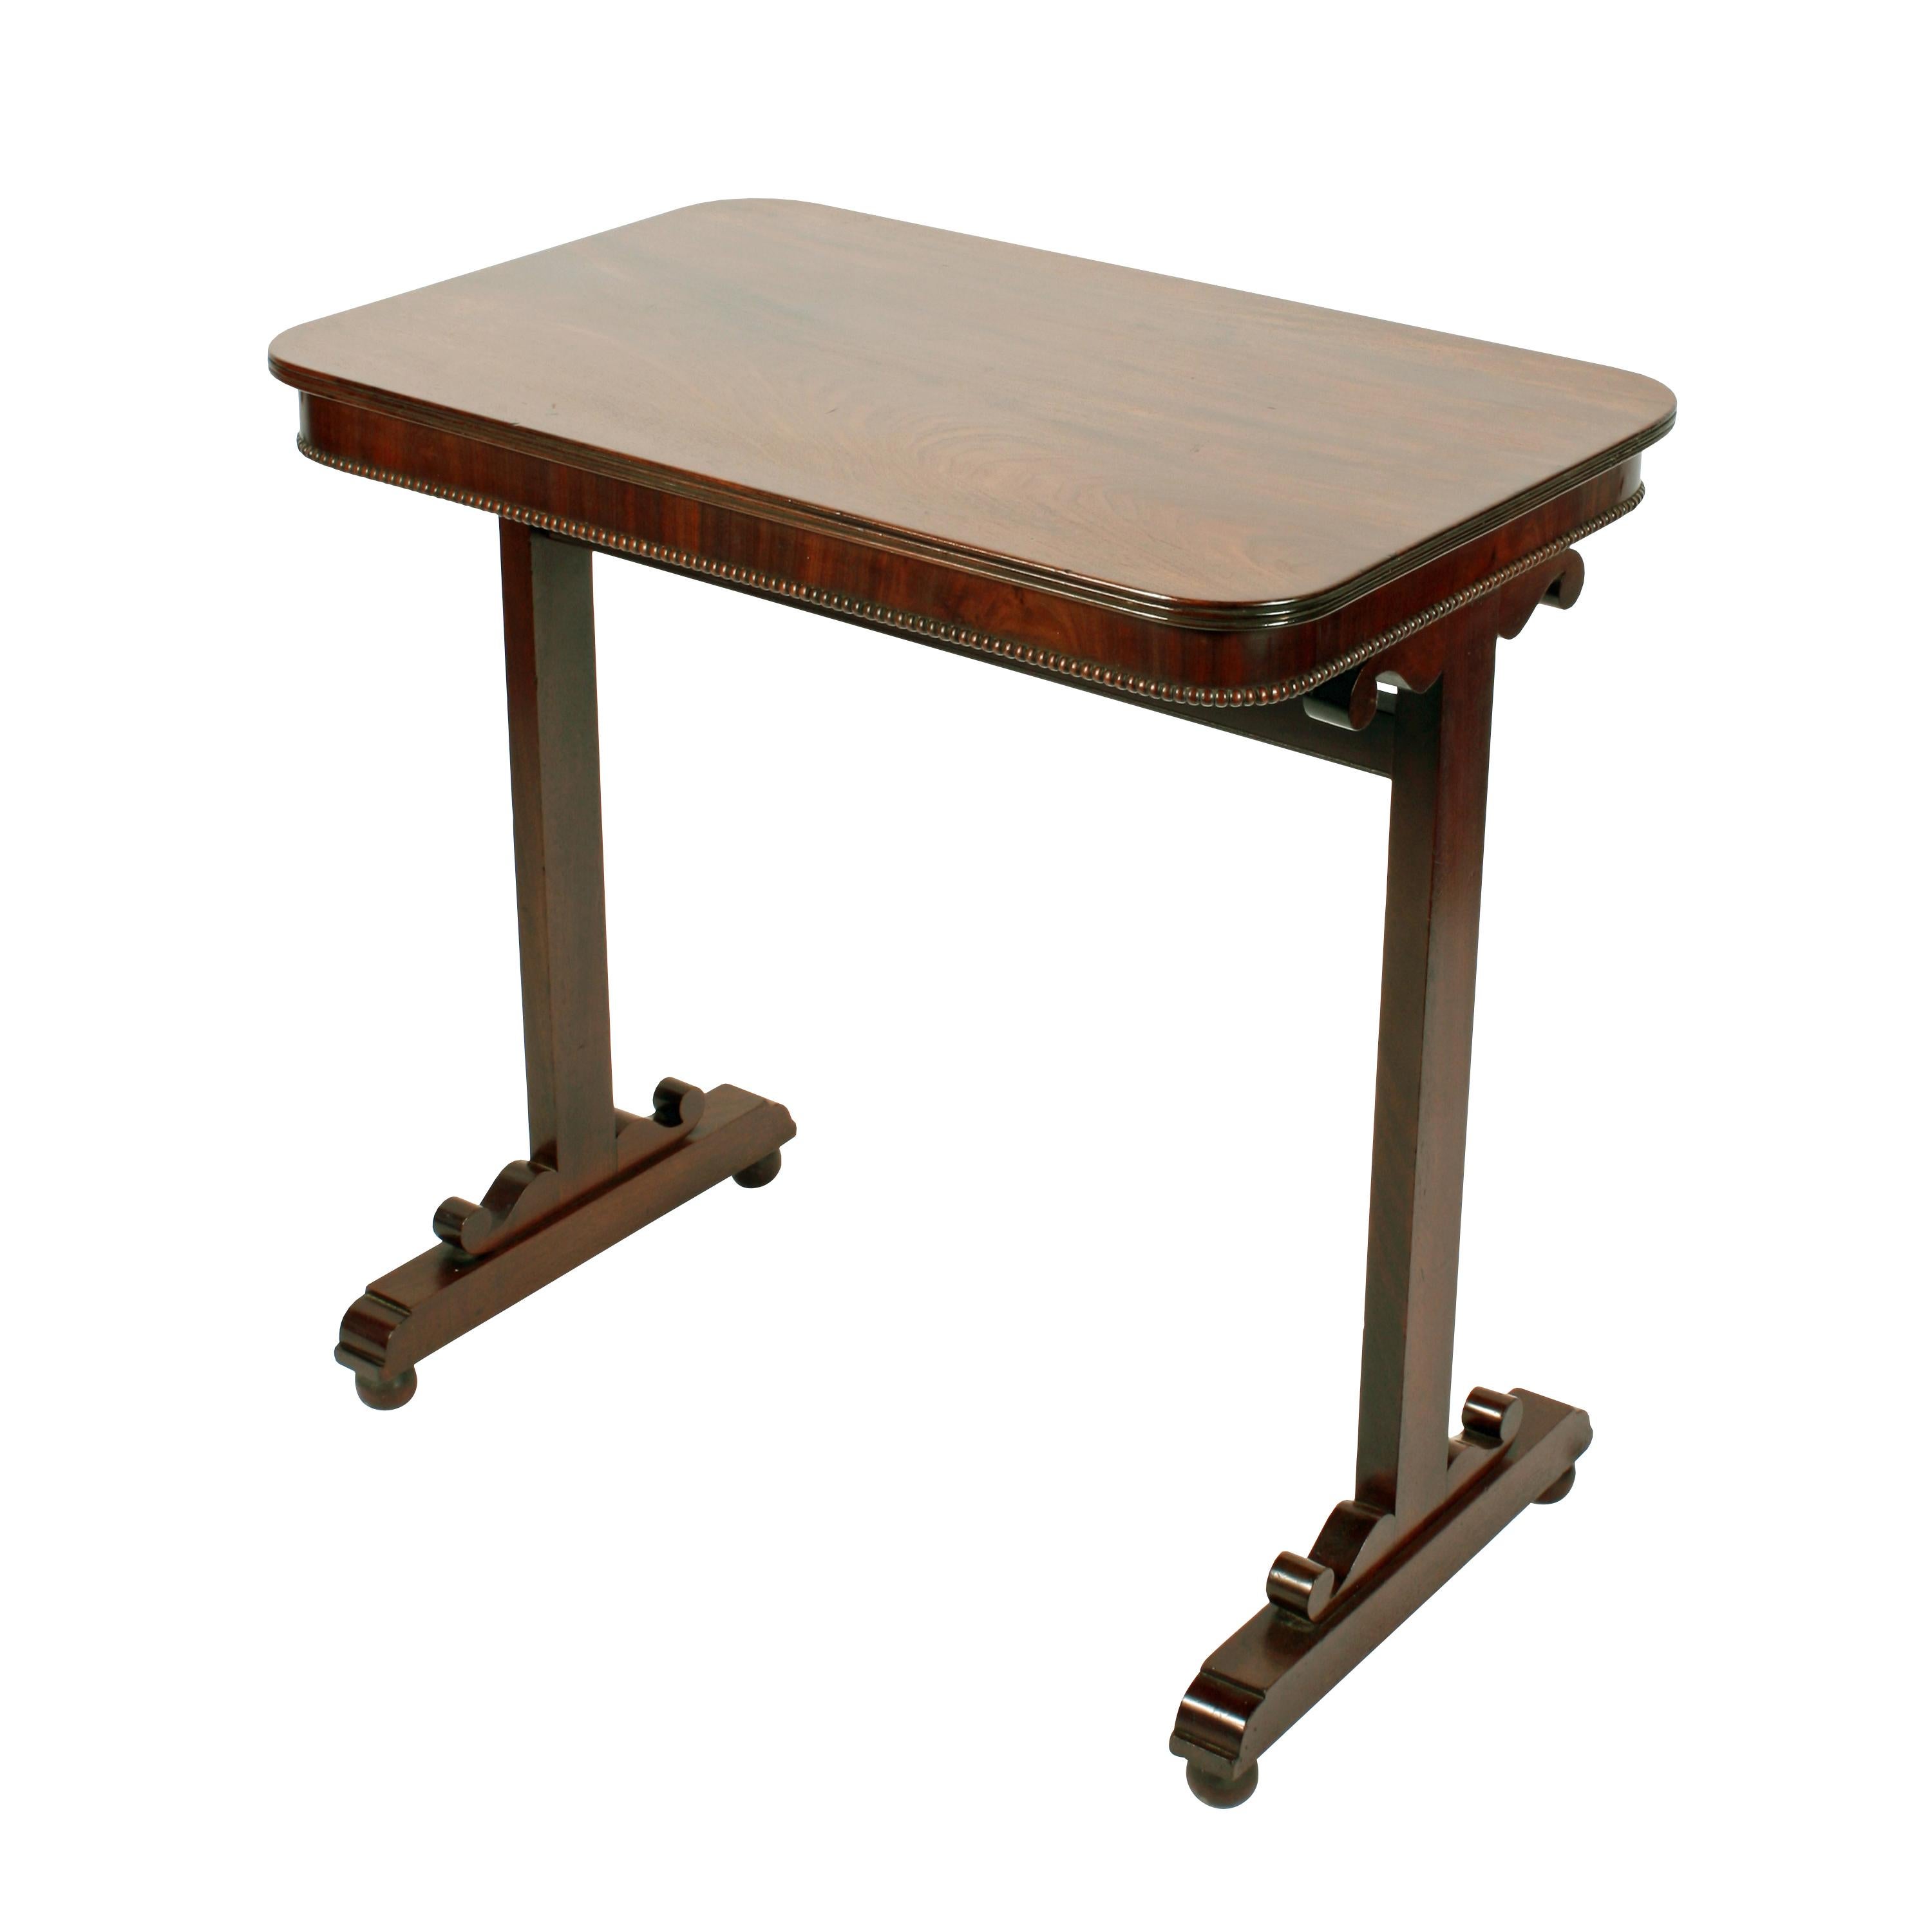 An early 19th century Regency mahogany twin support base side table.

The table has a one piece oblong top with a reeded edge and a crossbanded frieze below the top that has a 'Pea' moulded edge.

The twin supports Stand on platform bases that